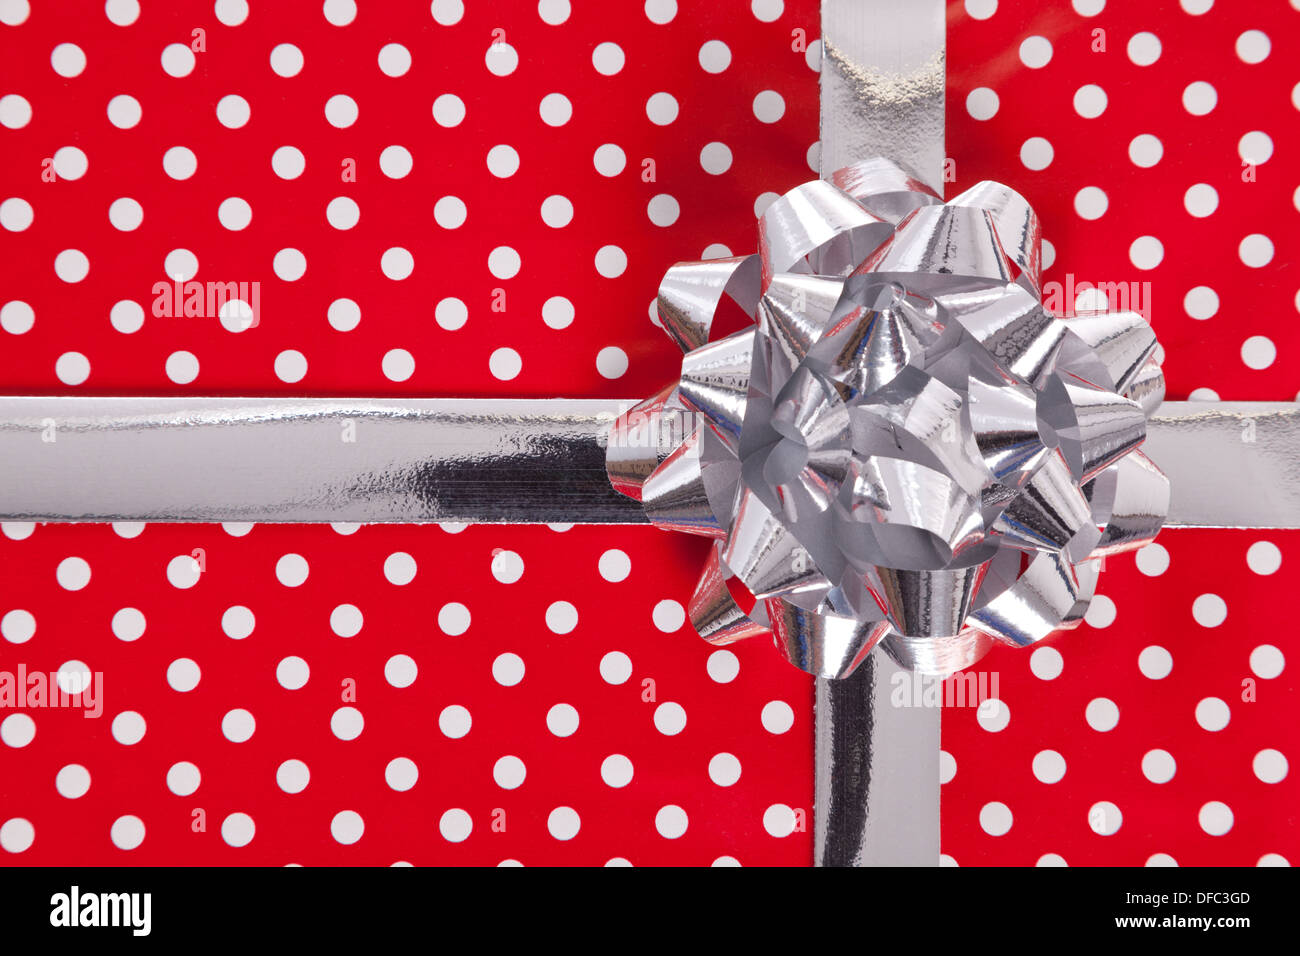 Red polka dot gift paper with silver bow and ribbon. Stock Photo